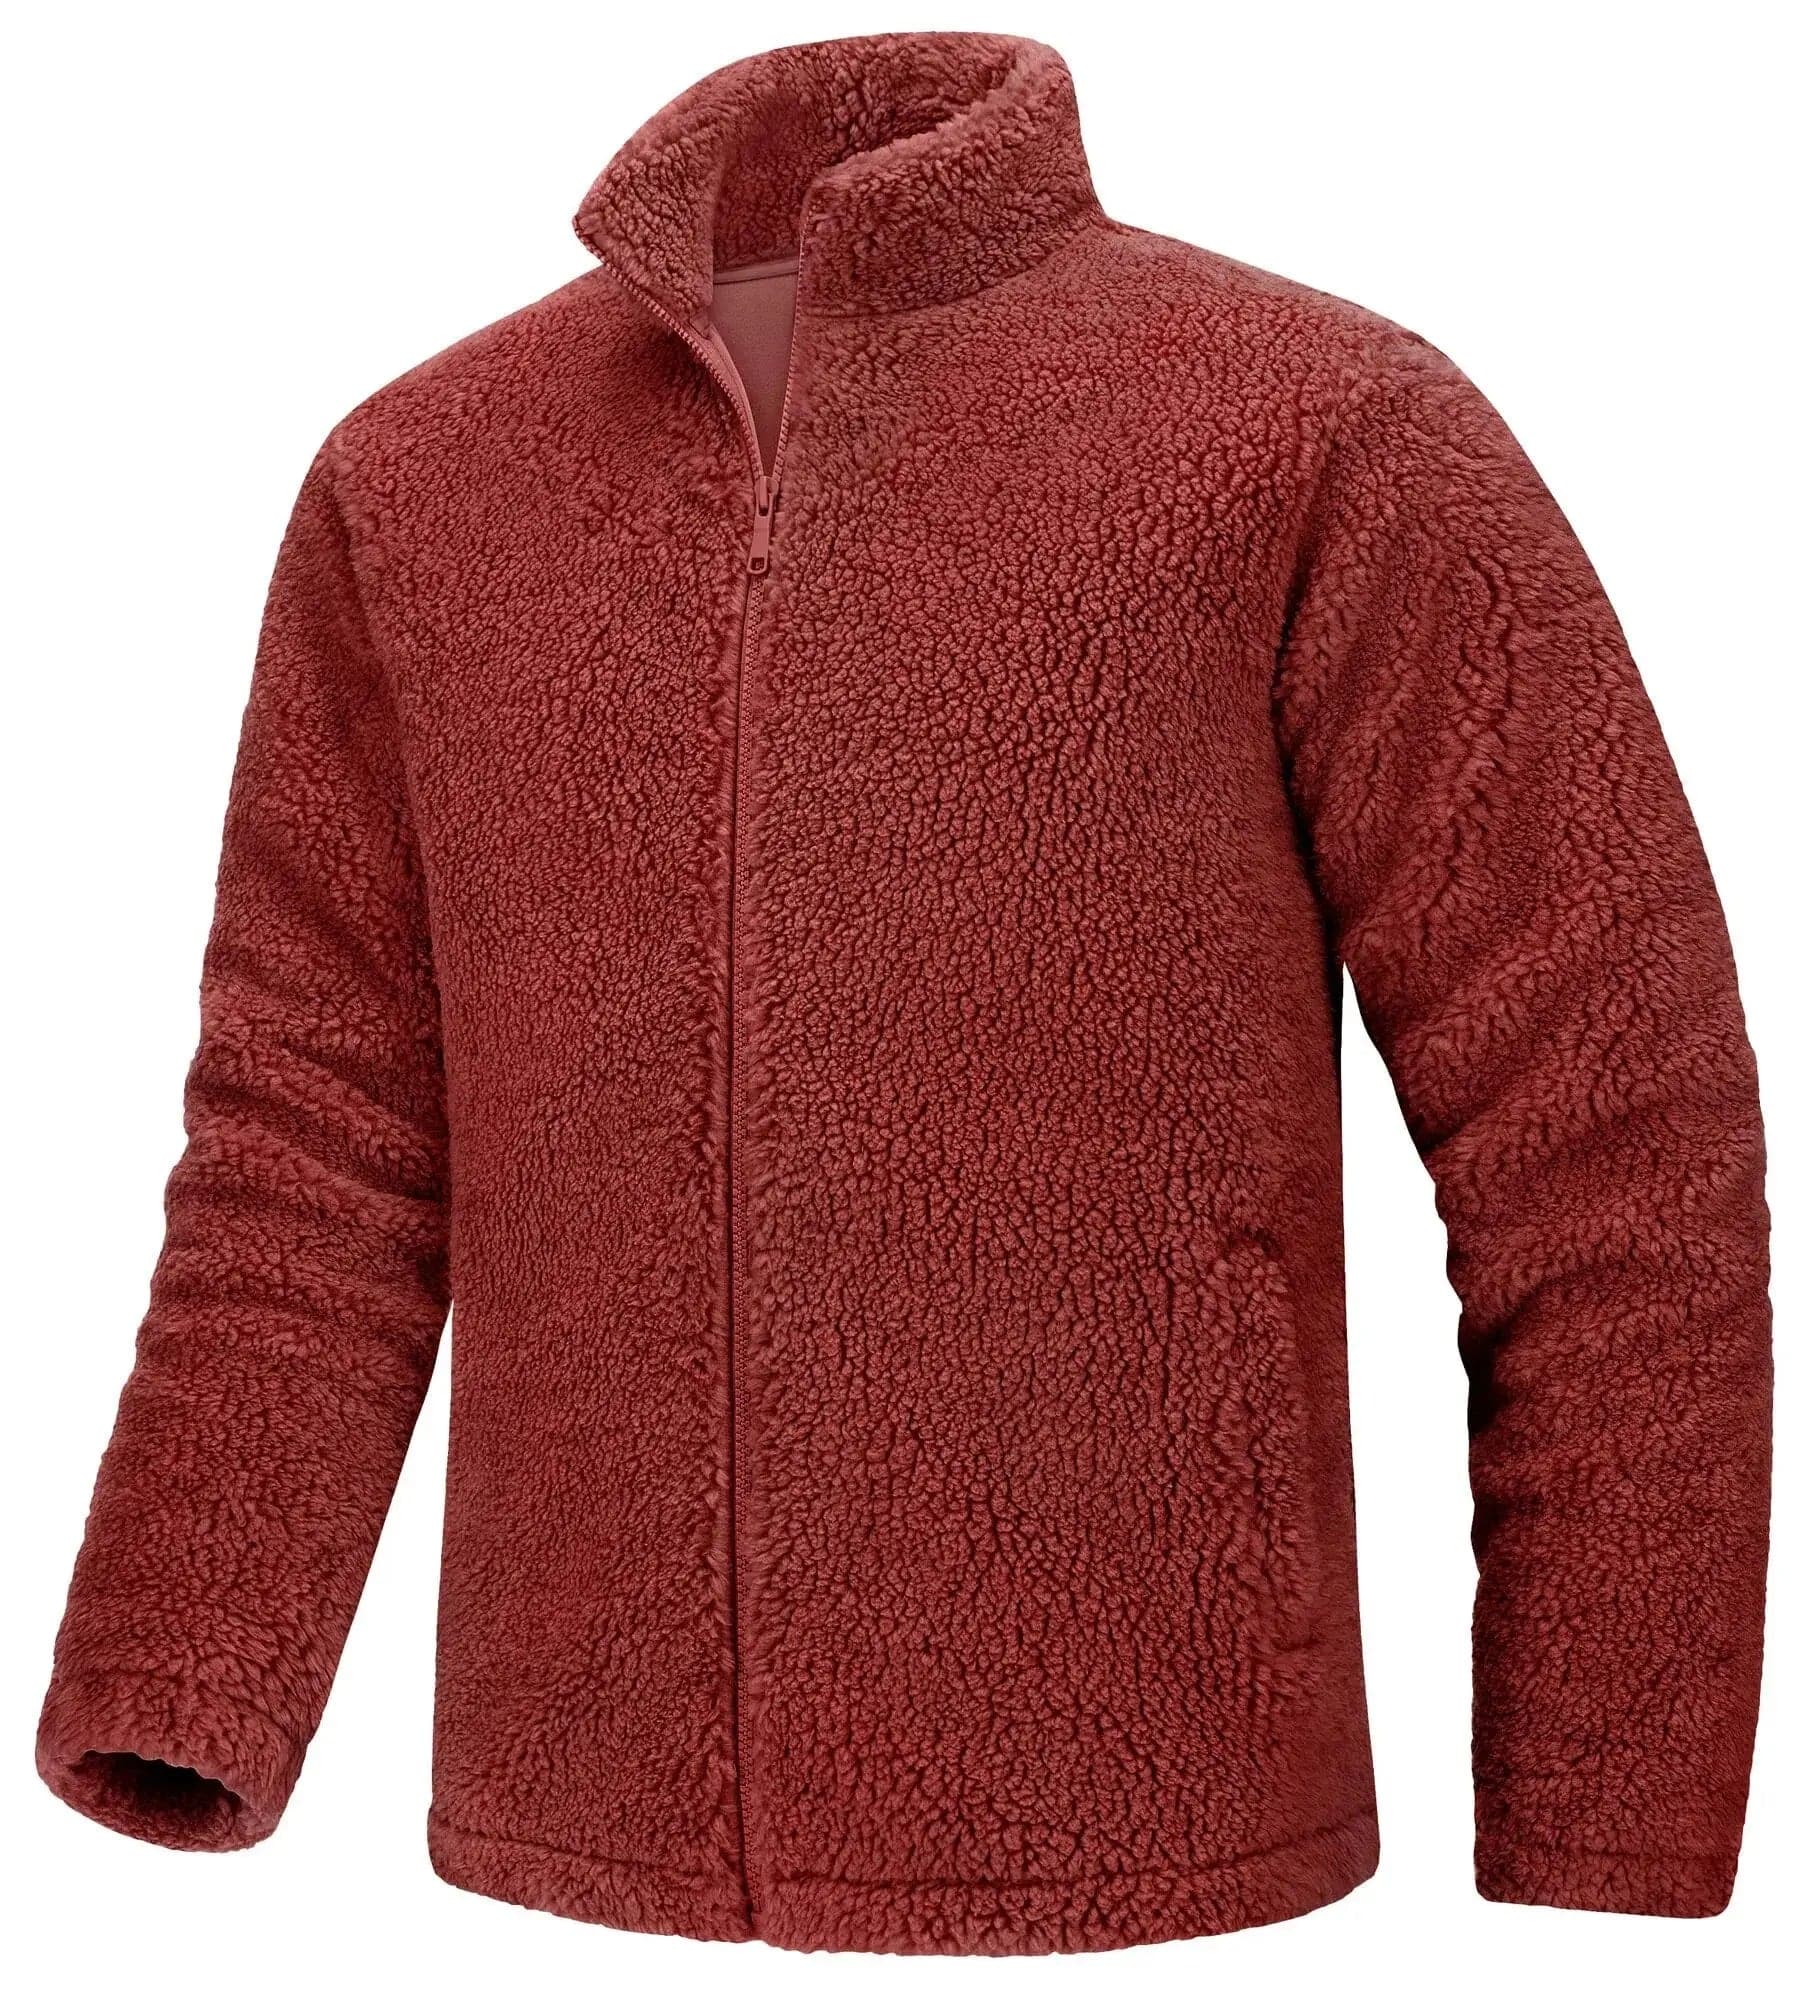 Cozy Sherpa Lined Winter Coat with Zippered Pockets-Liograft